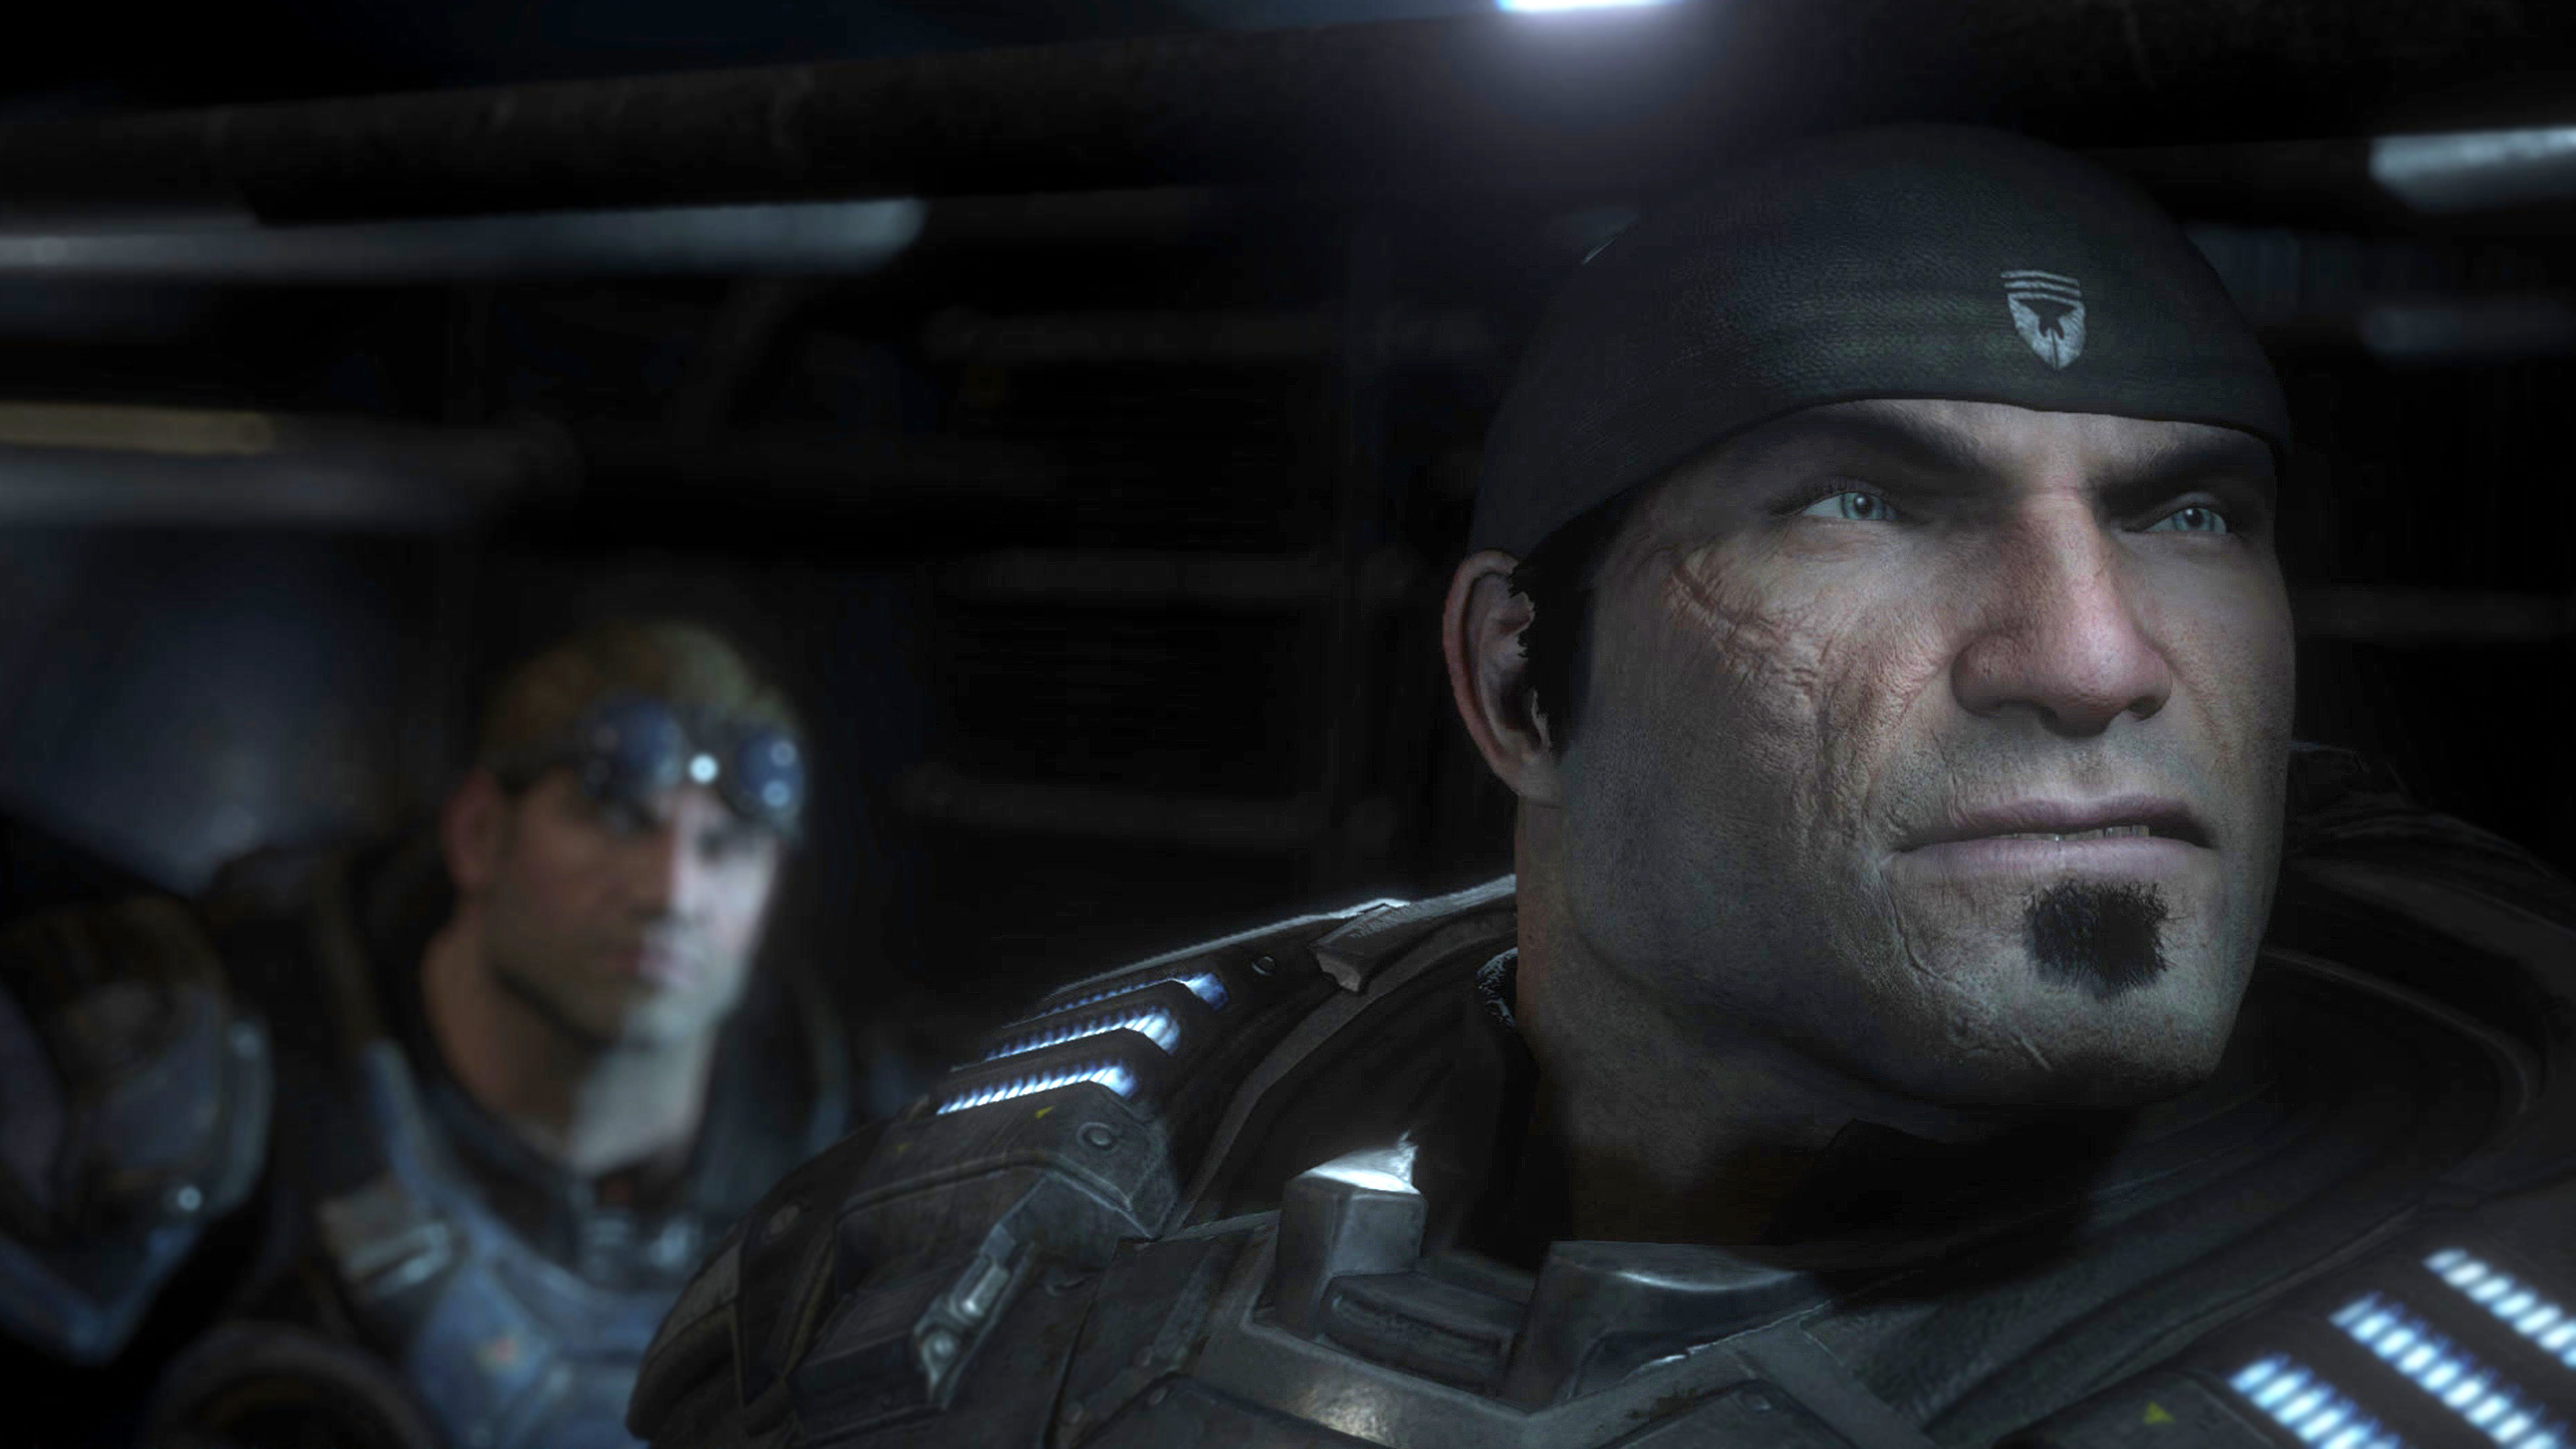 gears of war for pc requirements